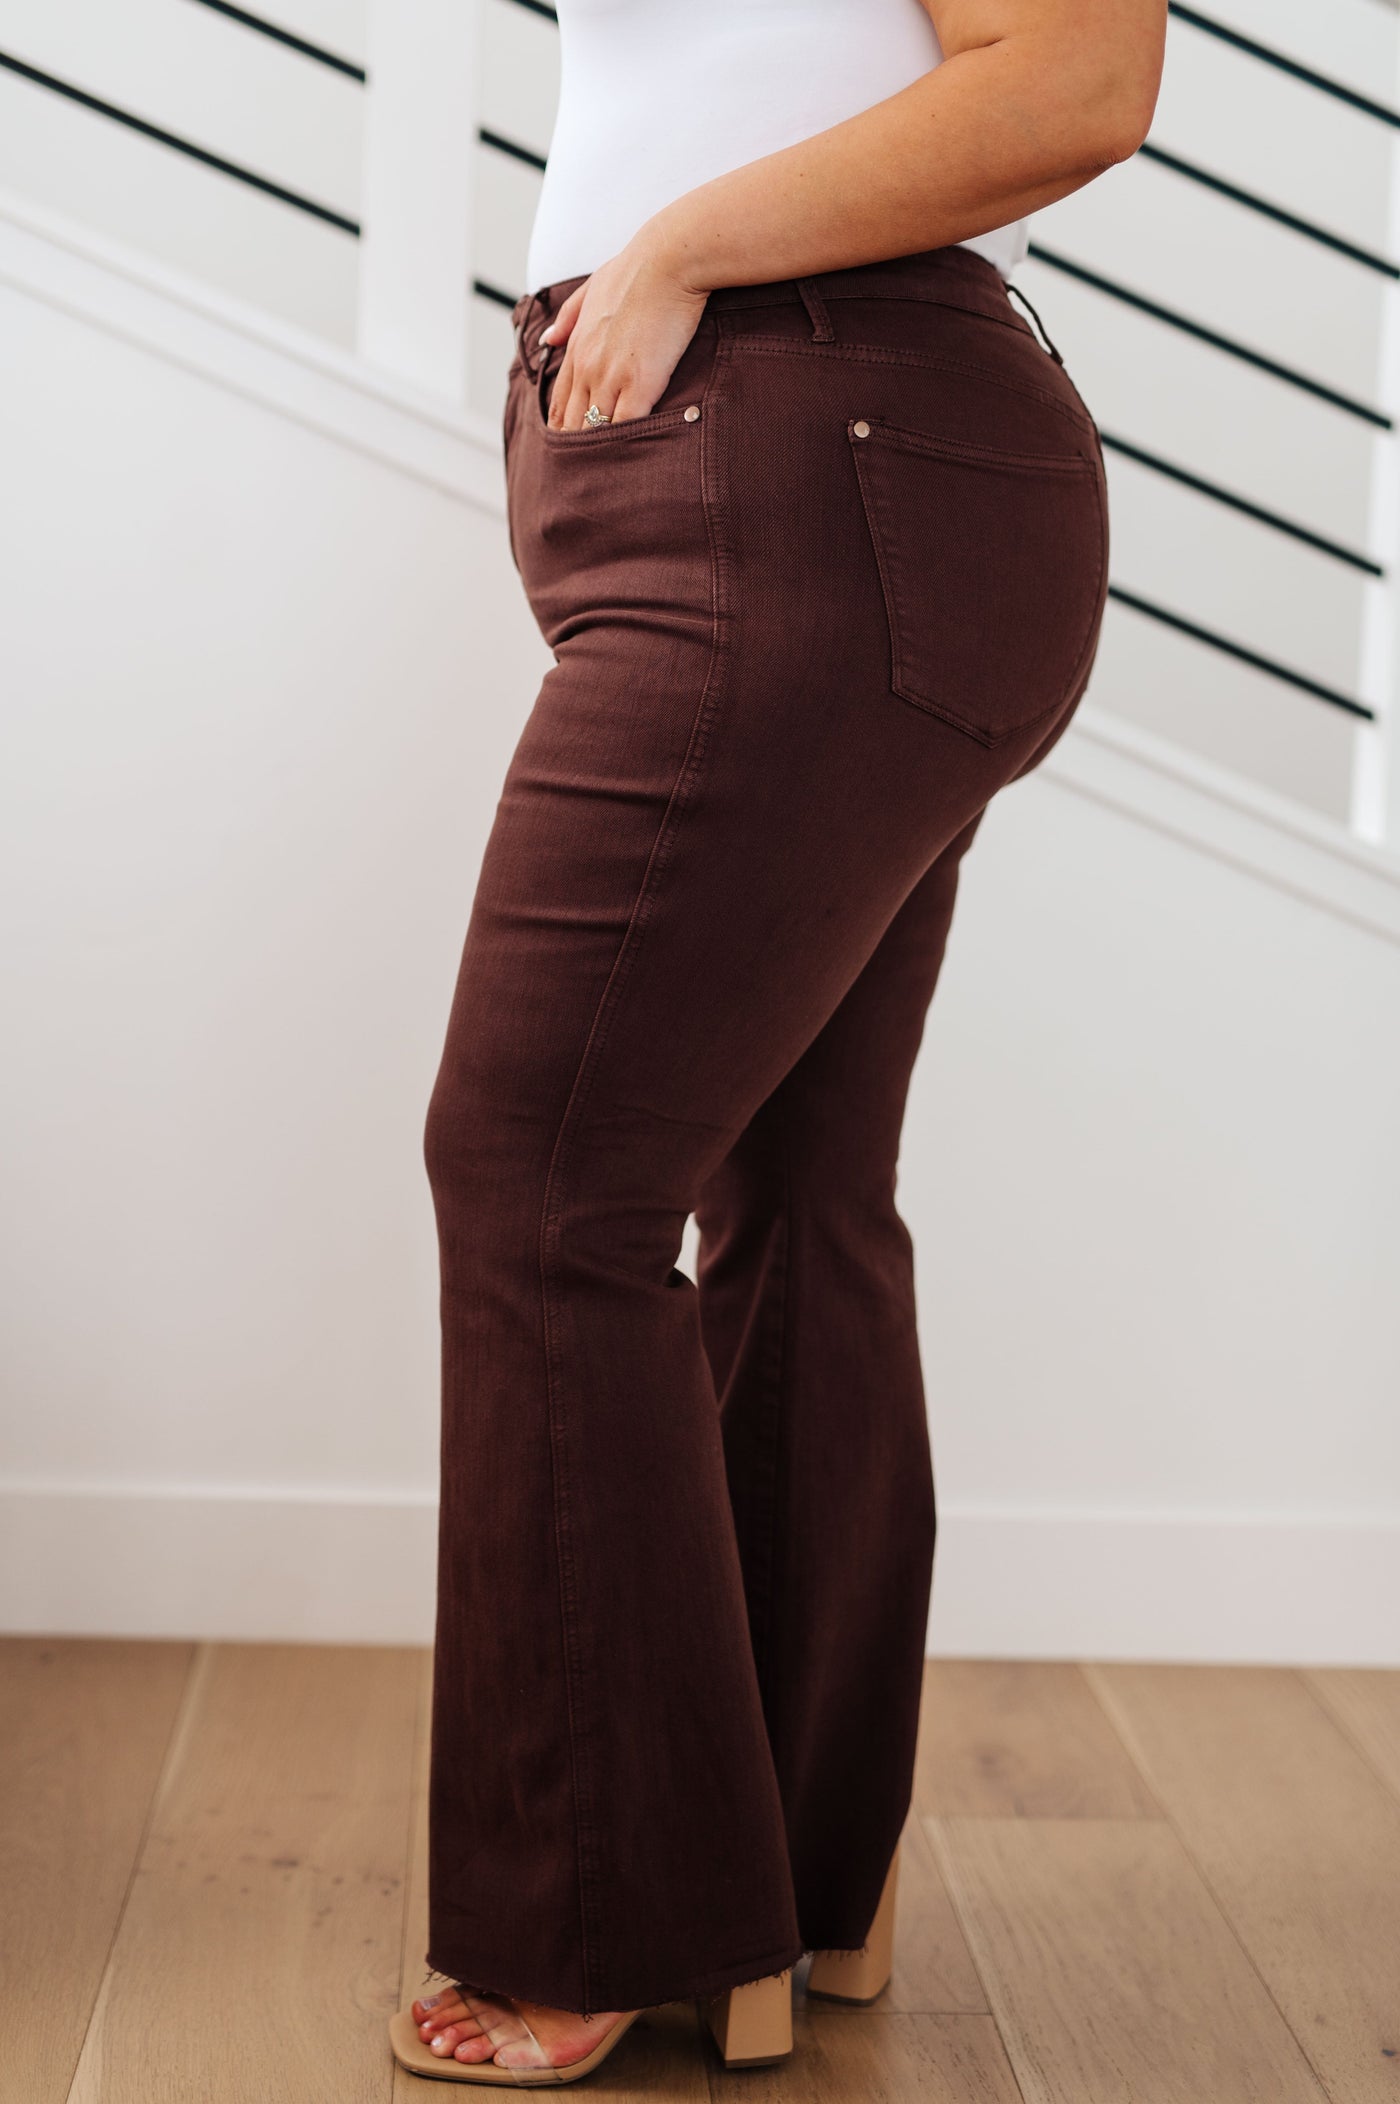 Our Sienna High Rise Control Top Flare Jeans ifrom Judy Blue look as great as they feelOur Sienna High Rise Control Top Flare Jeans ifrom Judy Blue look as great as they feel. Enjoy the garment-dyed espresso brown coloring and the tummy control tech to help you look your best